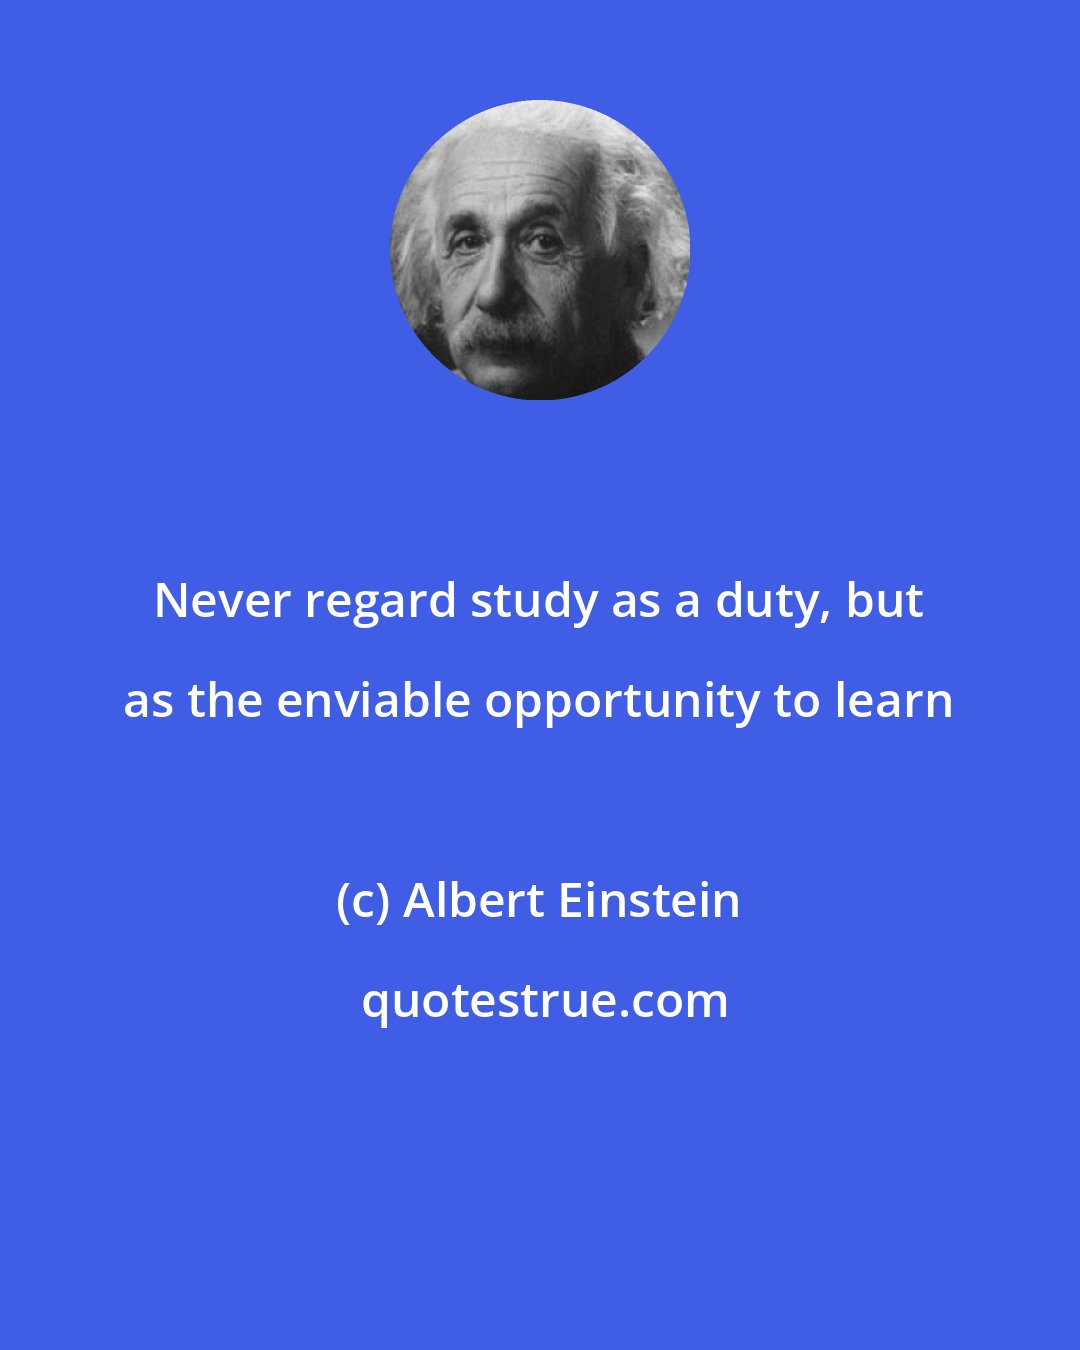 Albert Einstein: Never regard study as a duty, but as the enviable opportunity to learn